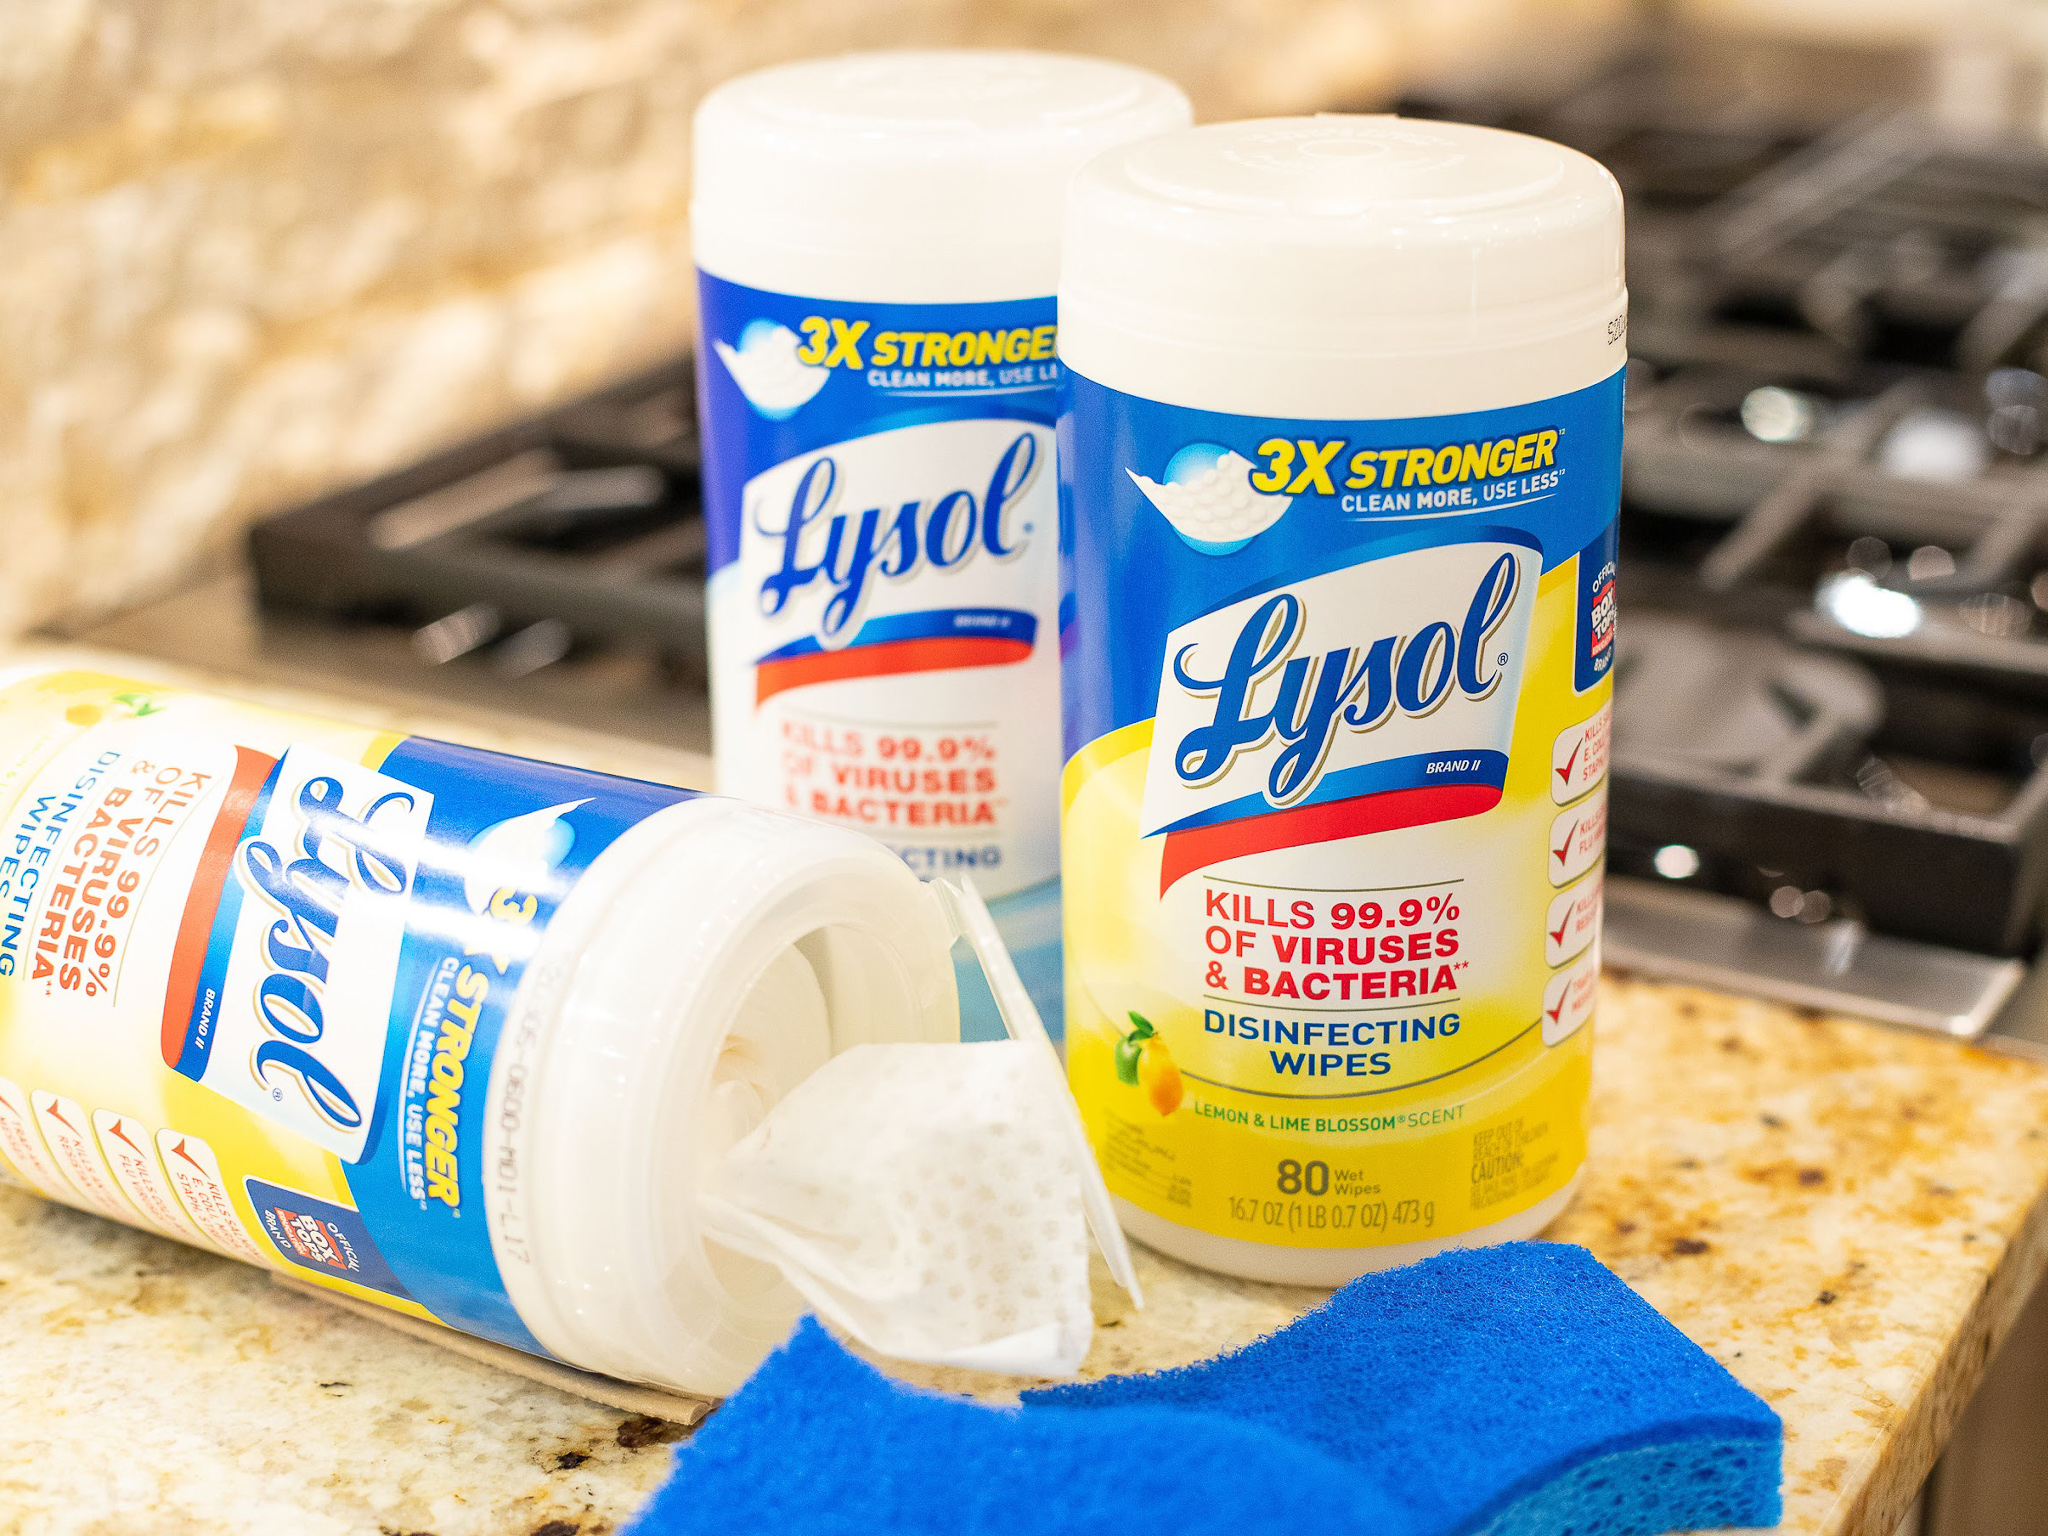 Get Lysol Disinfecting Wipes For Just $2.85 At Publix